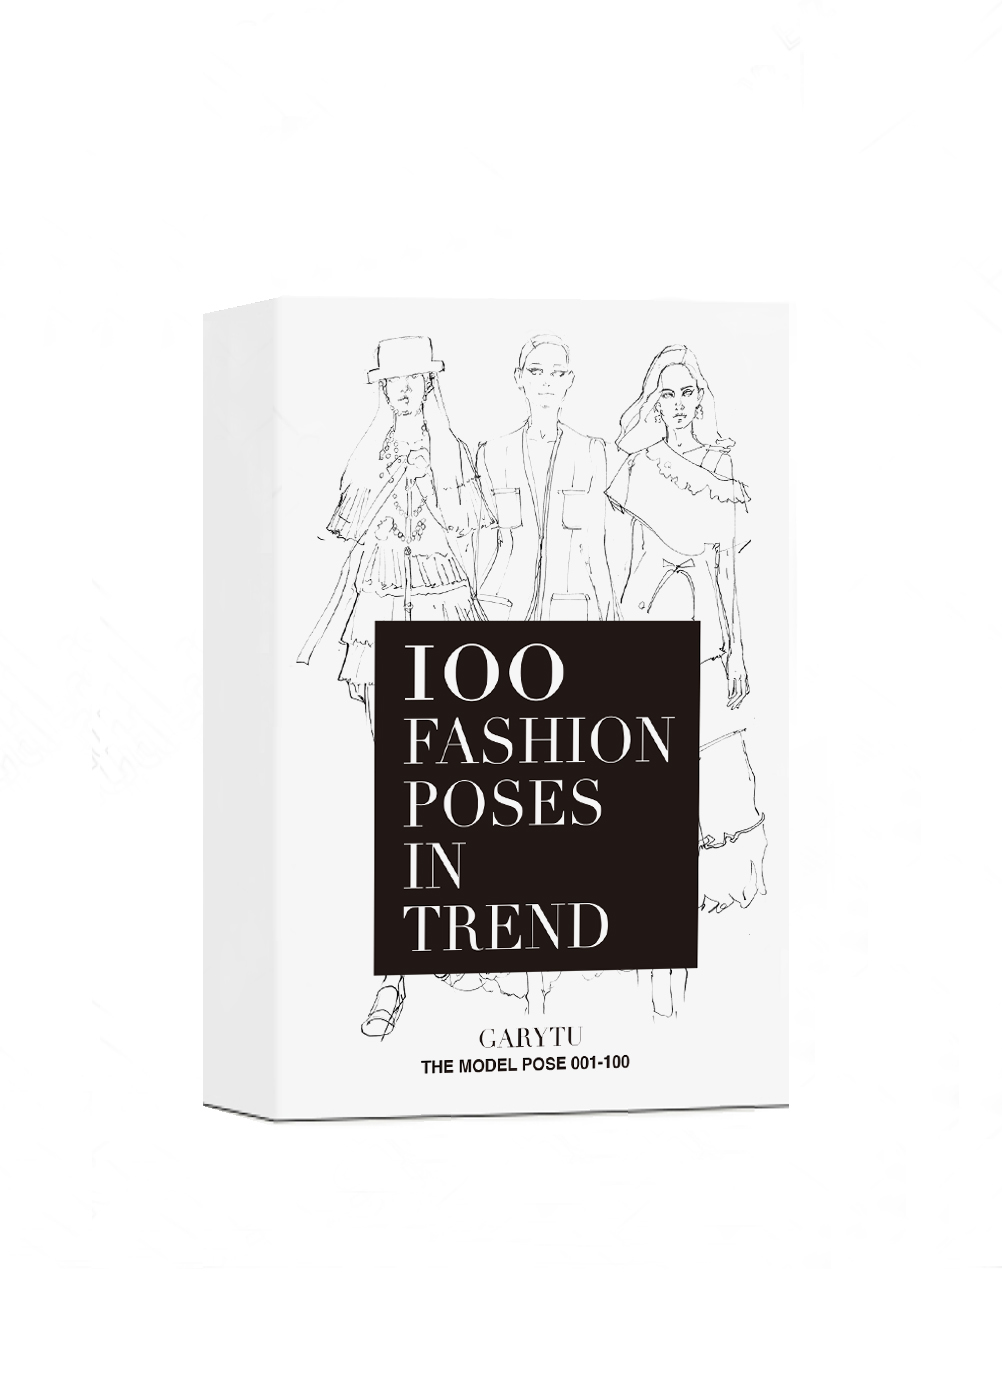 100 FASHION POSES IN TREND 